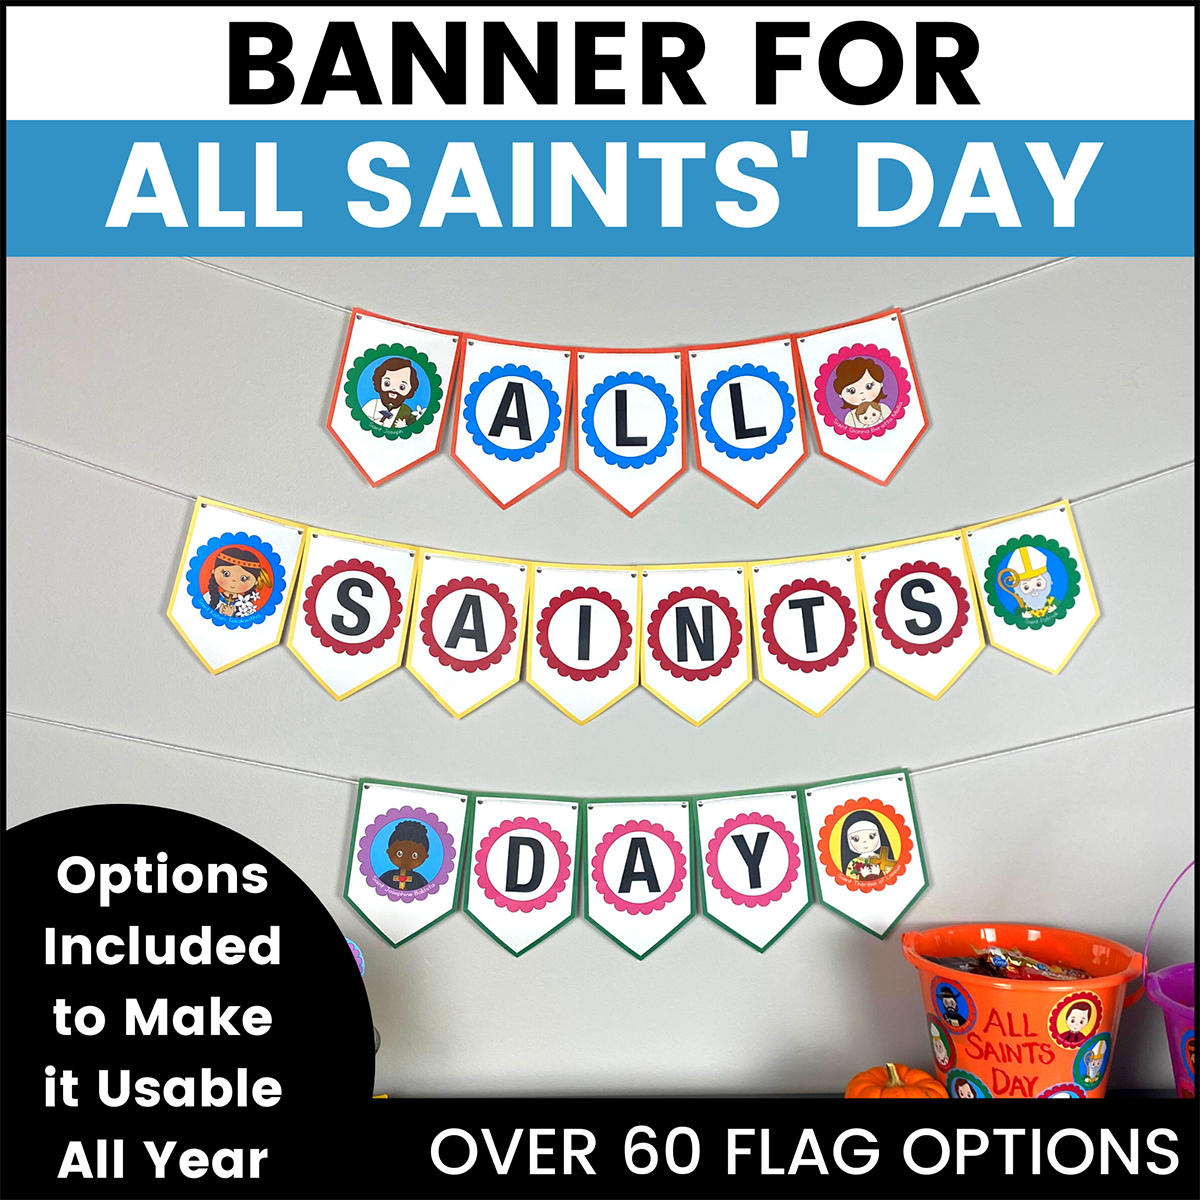 All Saints' Day Banner